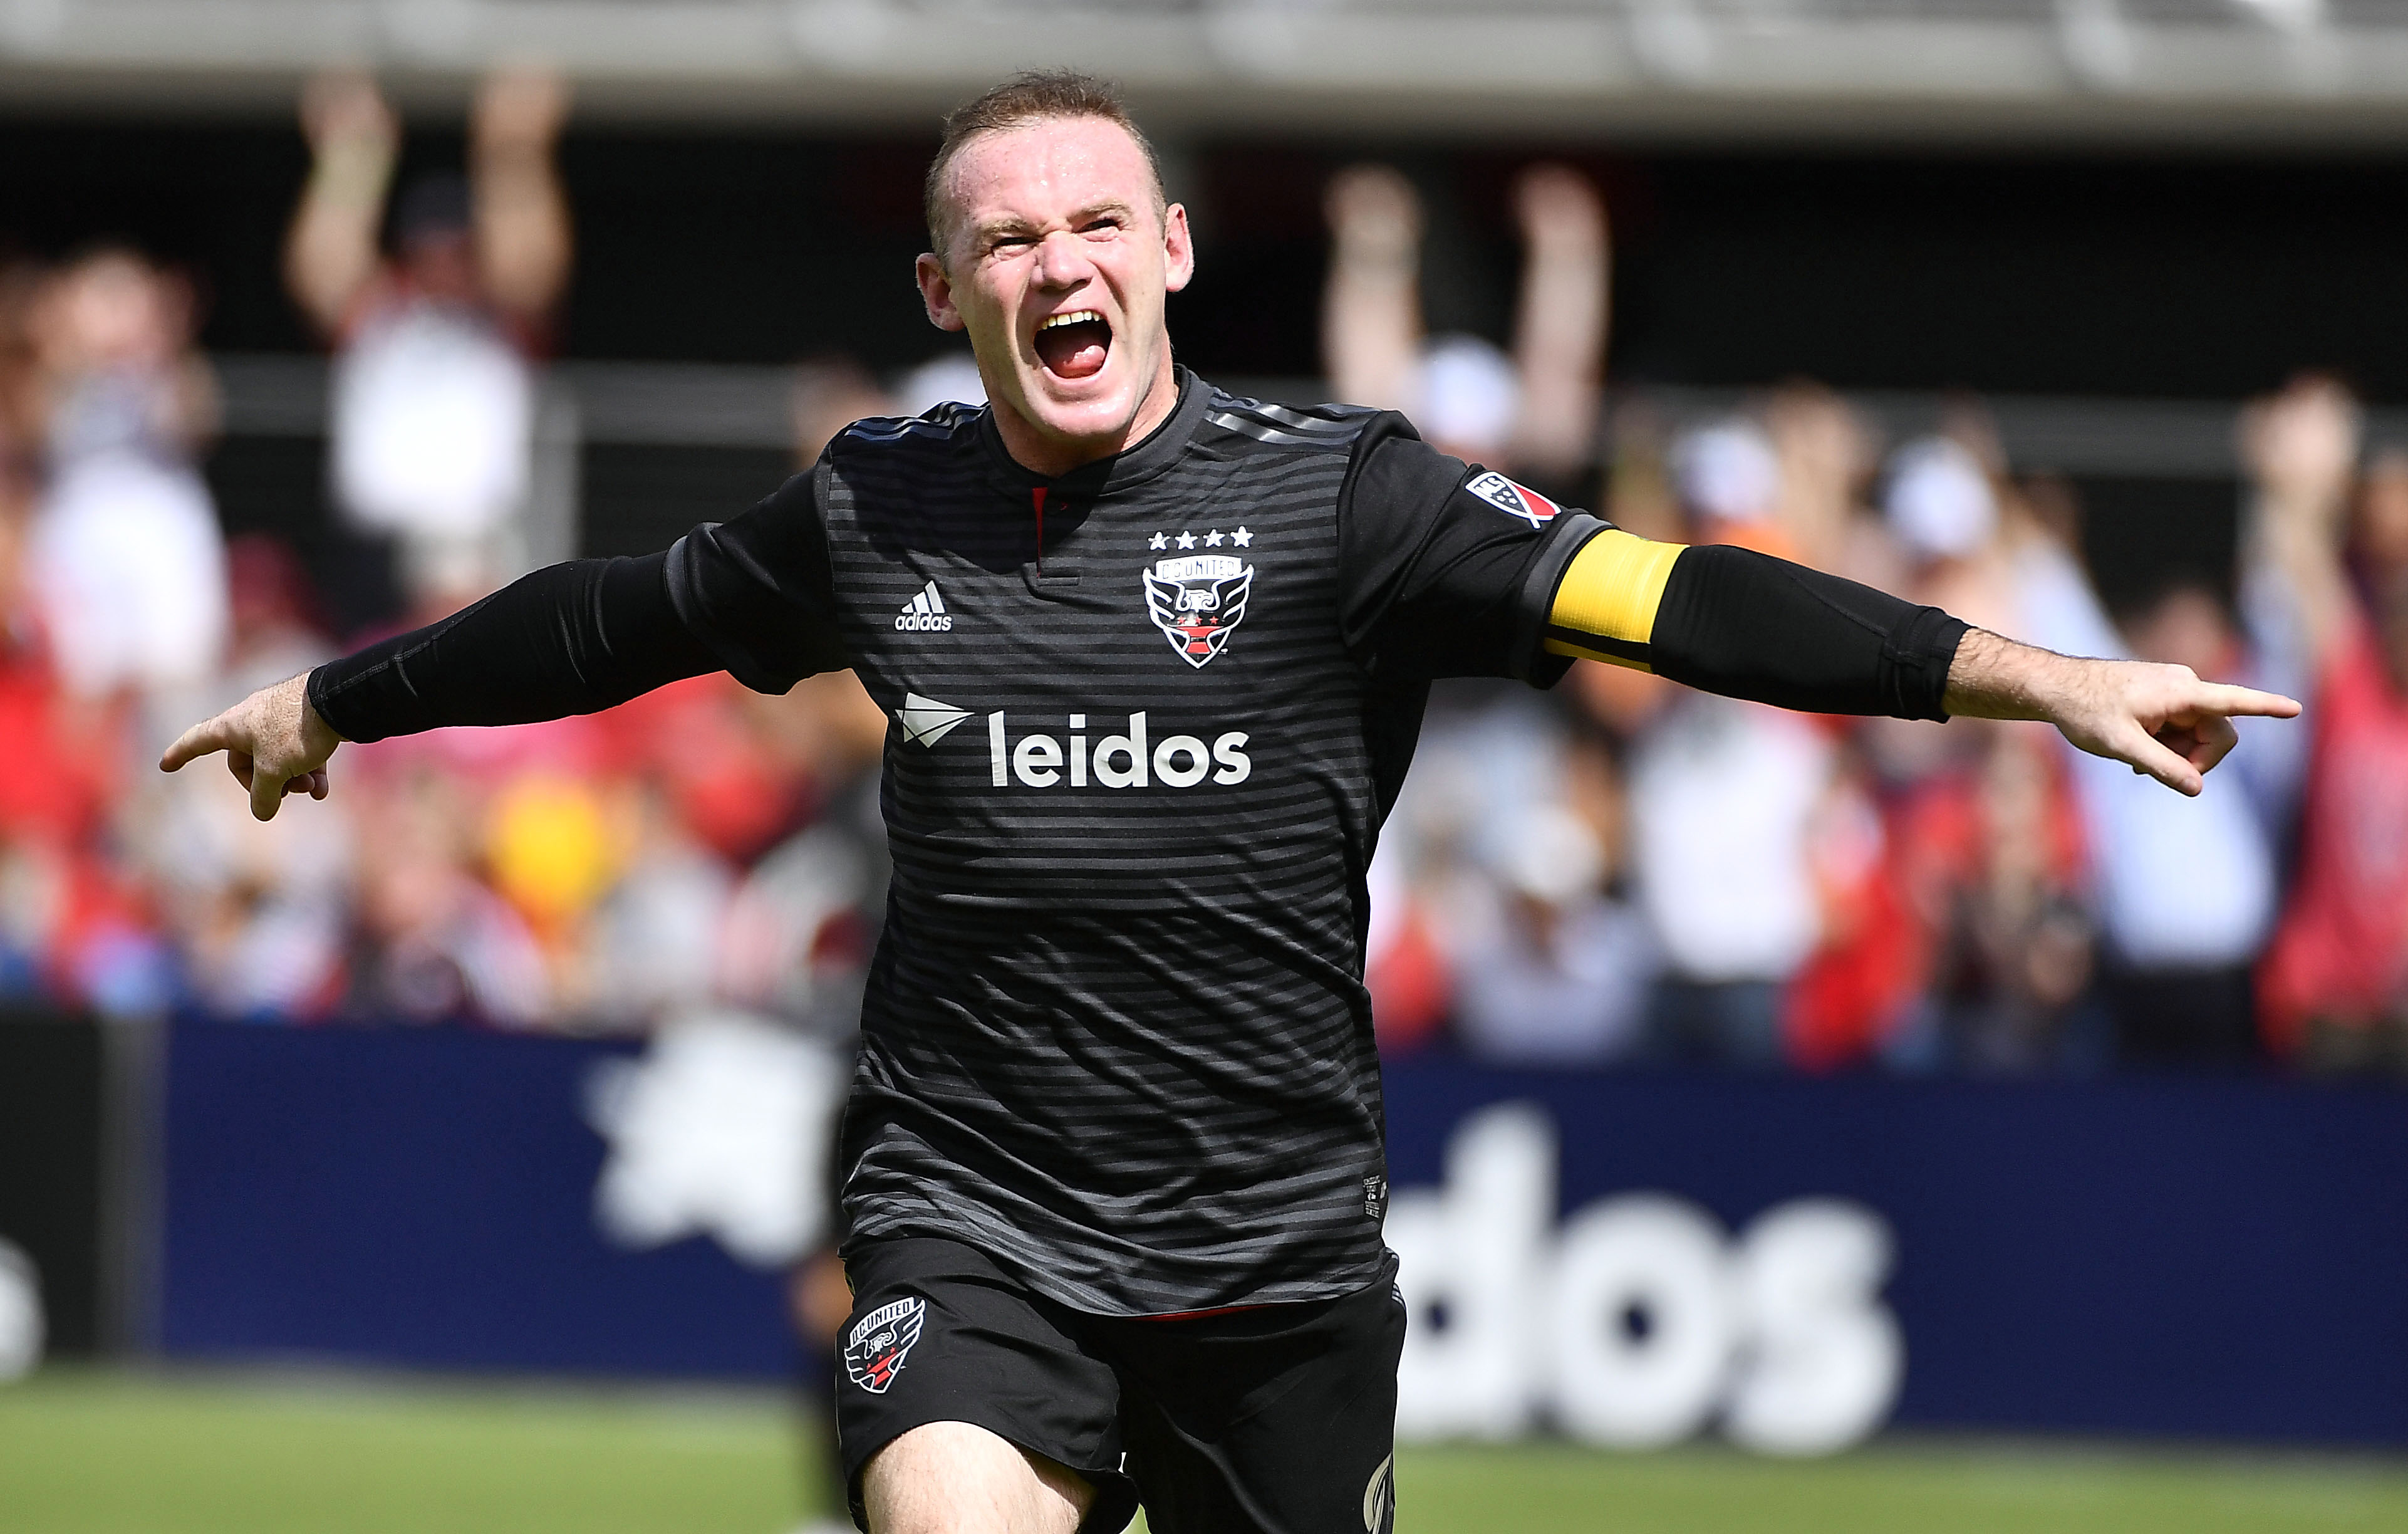 Christmas Eve: Wayne Rooney emBRACEs the District | DC United